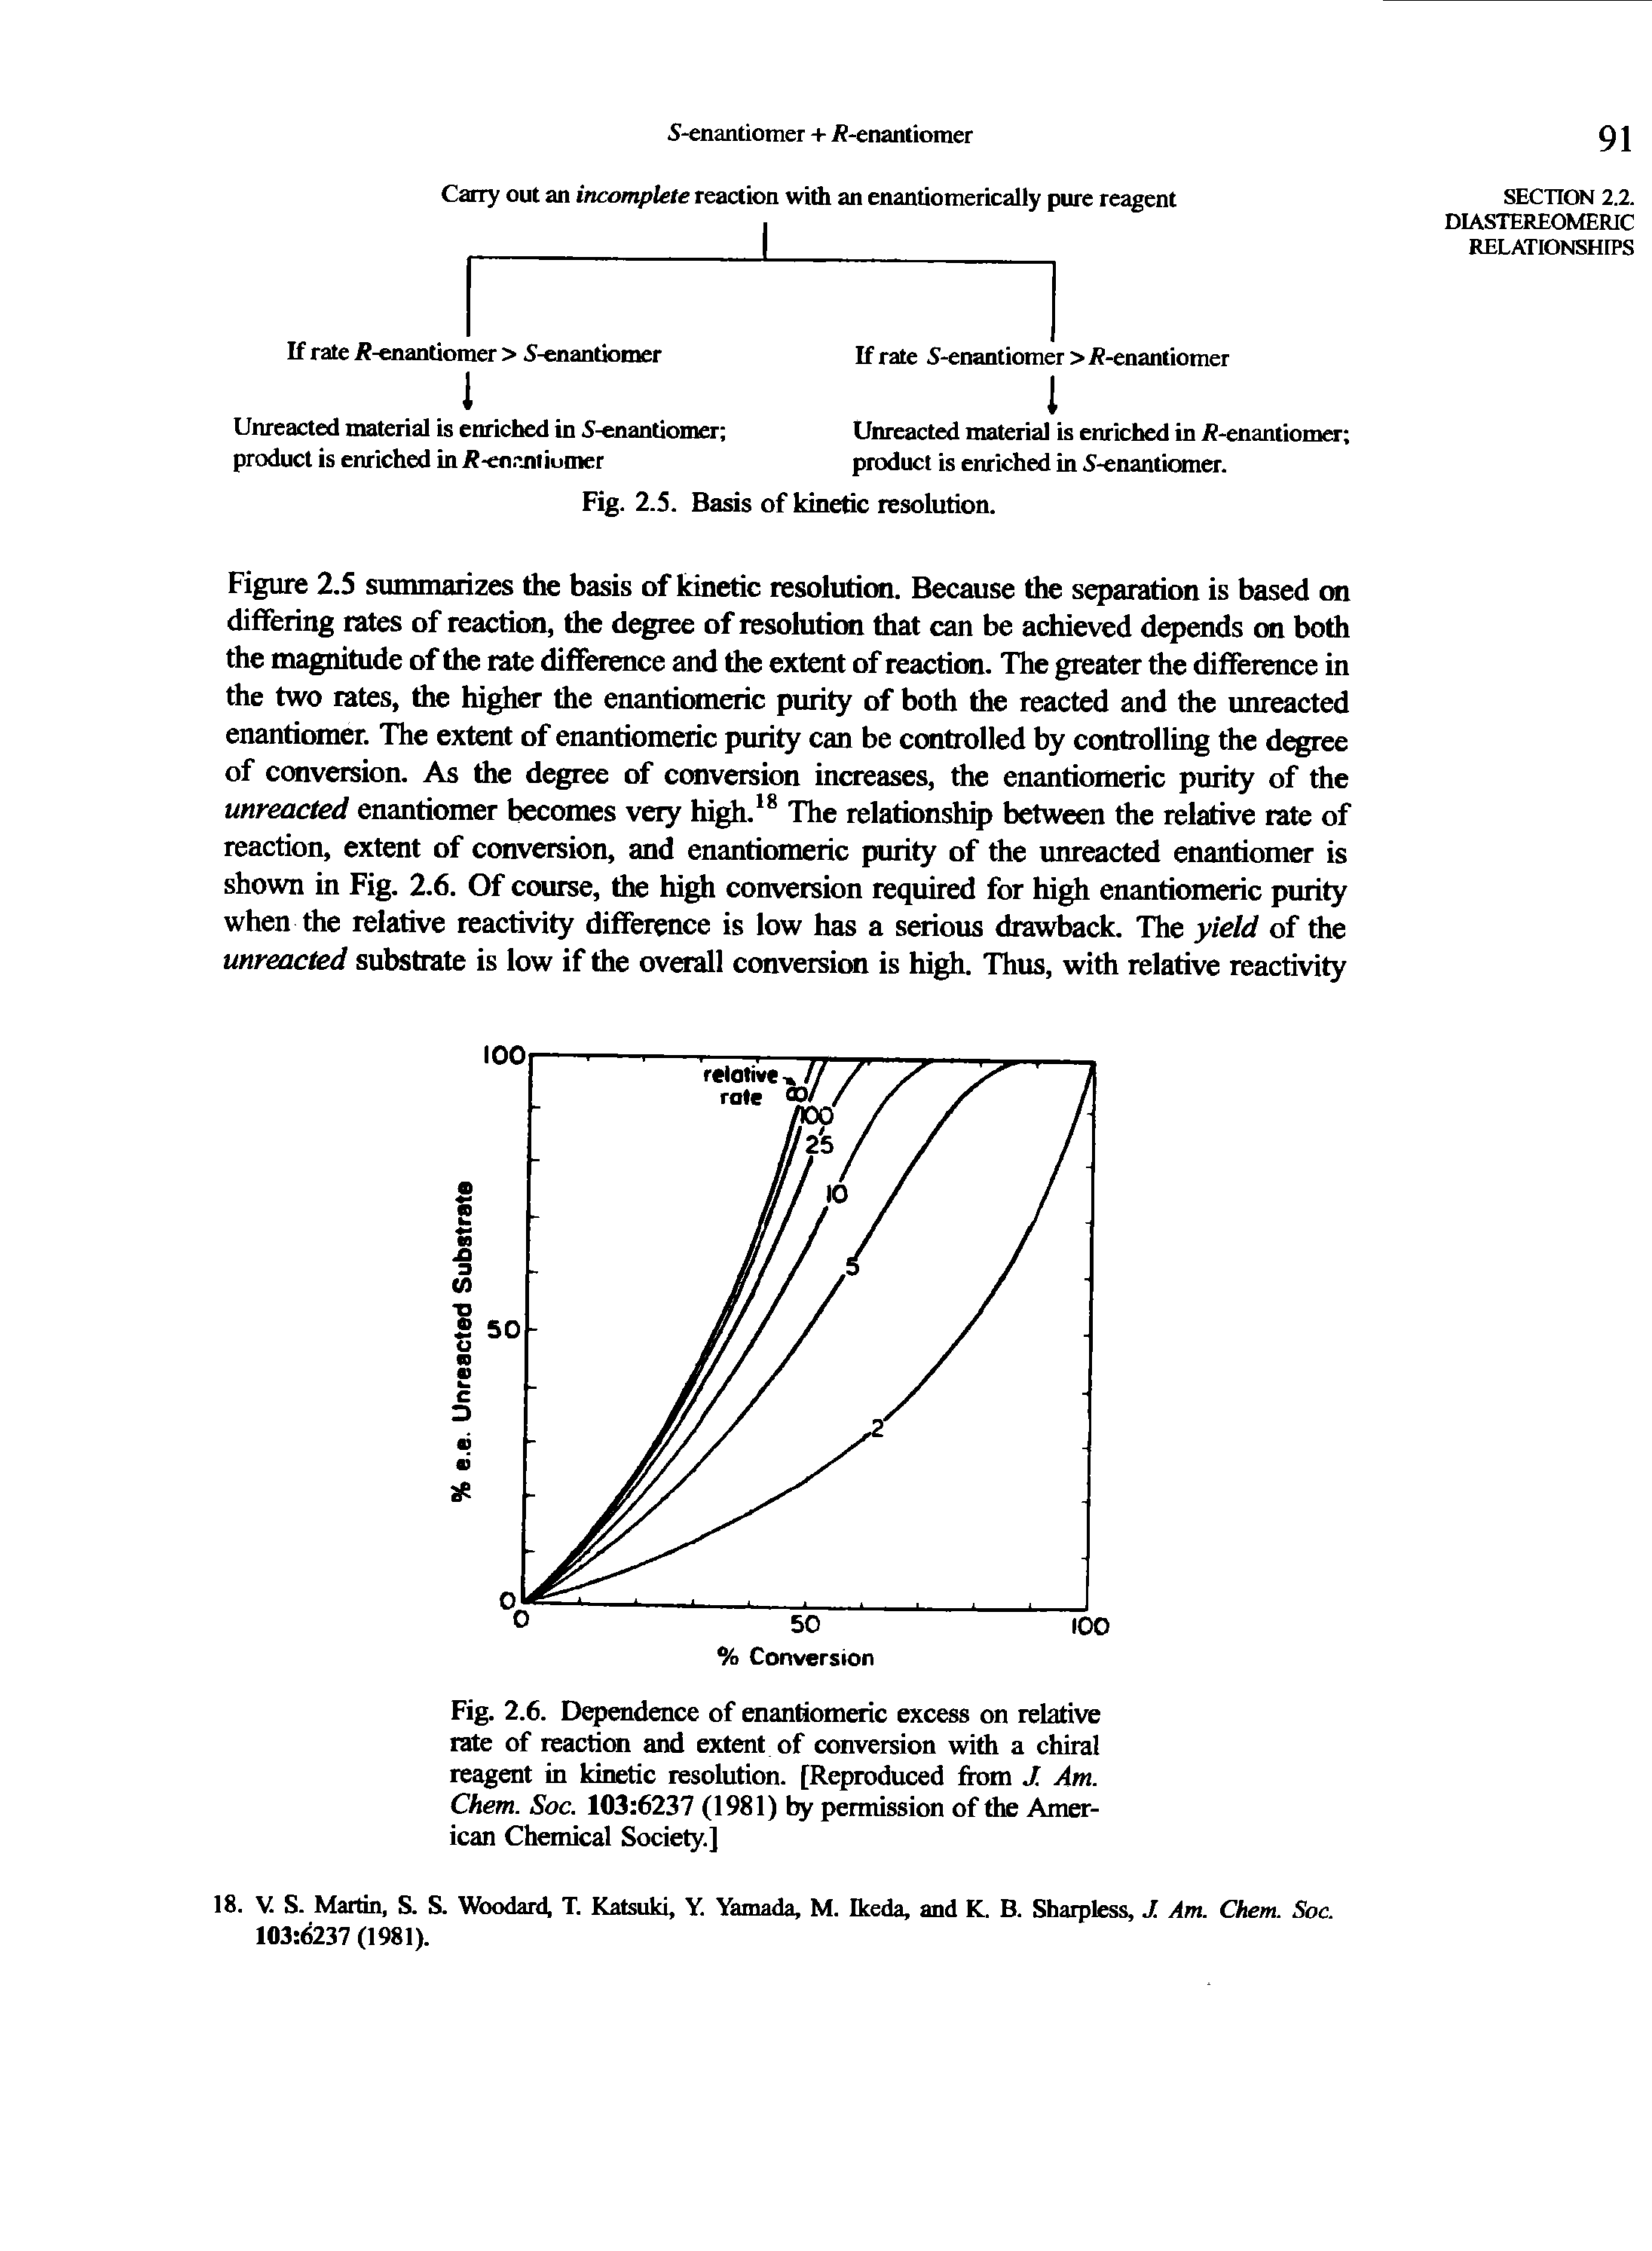 Fig. 2.6. Dependence of enanhomeric excess on relative rate of reaction and extent of conversion with a chiral reagent in kinetic resolution. [Reproduced from J. Am. Chem. Soc. 103 6237 (1981) by permission of the American Chemical Society.]...